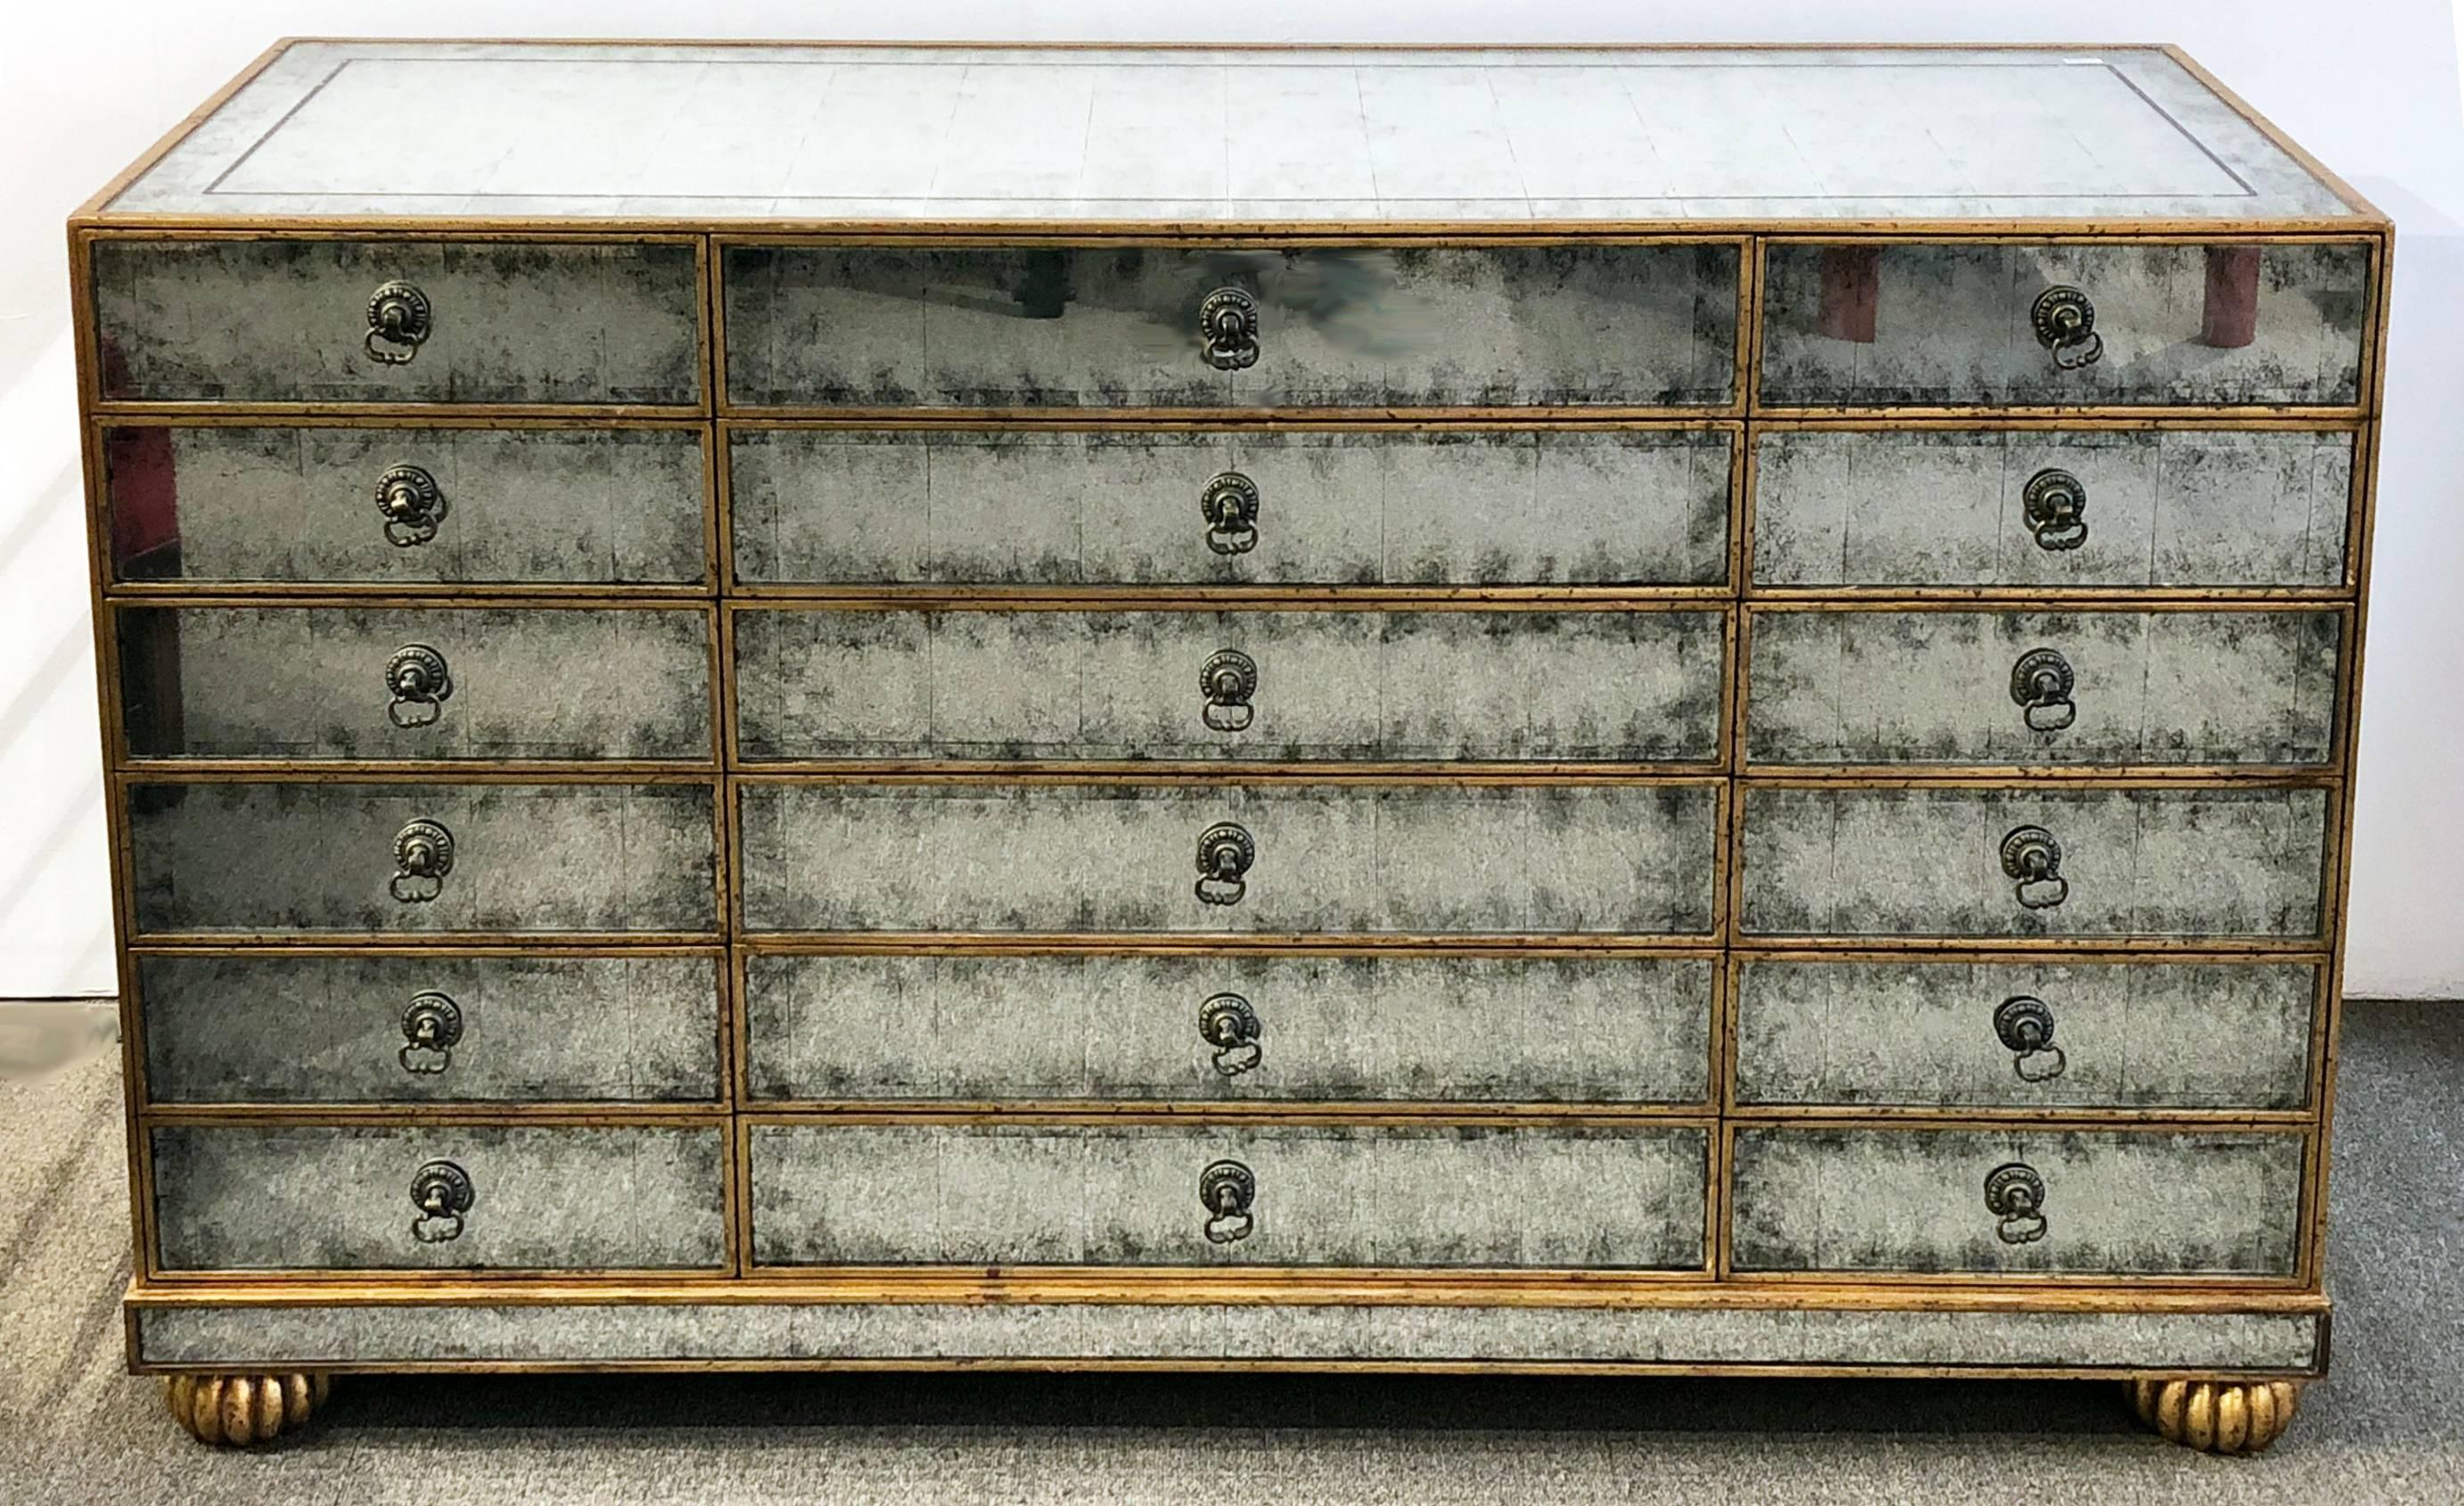 American Mirrored Dresser with 18 Drawers